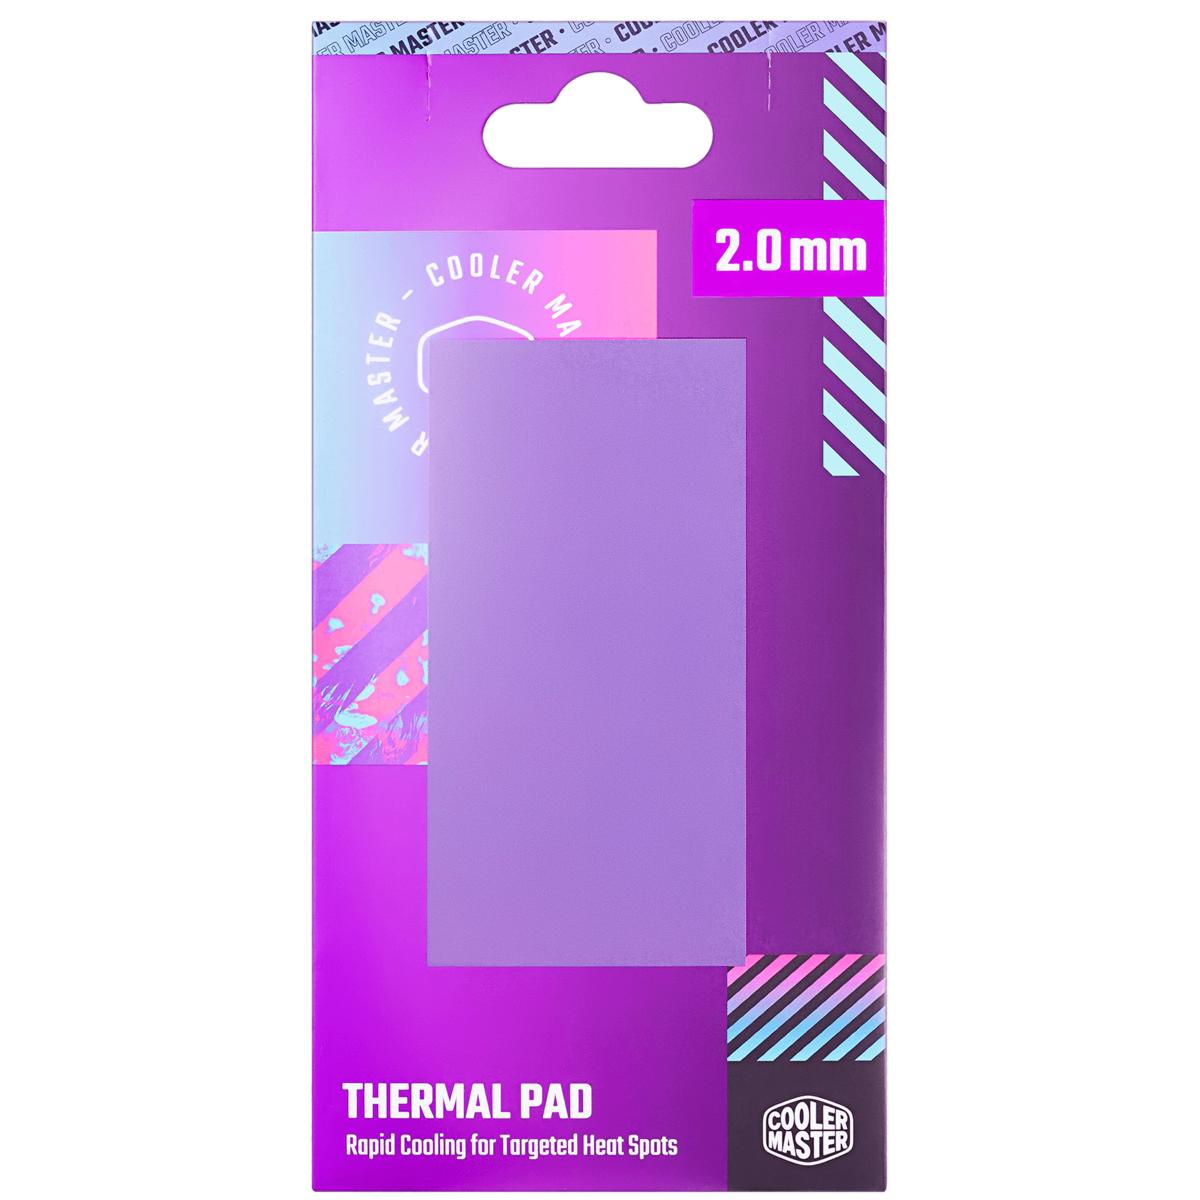 Cooler Master Thermal Pad 2.0mm High Performance Thermal Pad w/ High Thermal Conductivity 13.3w/mK